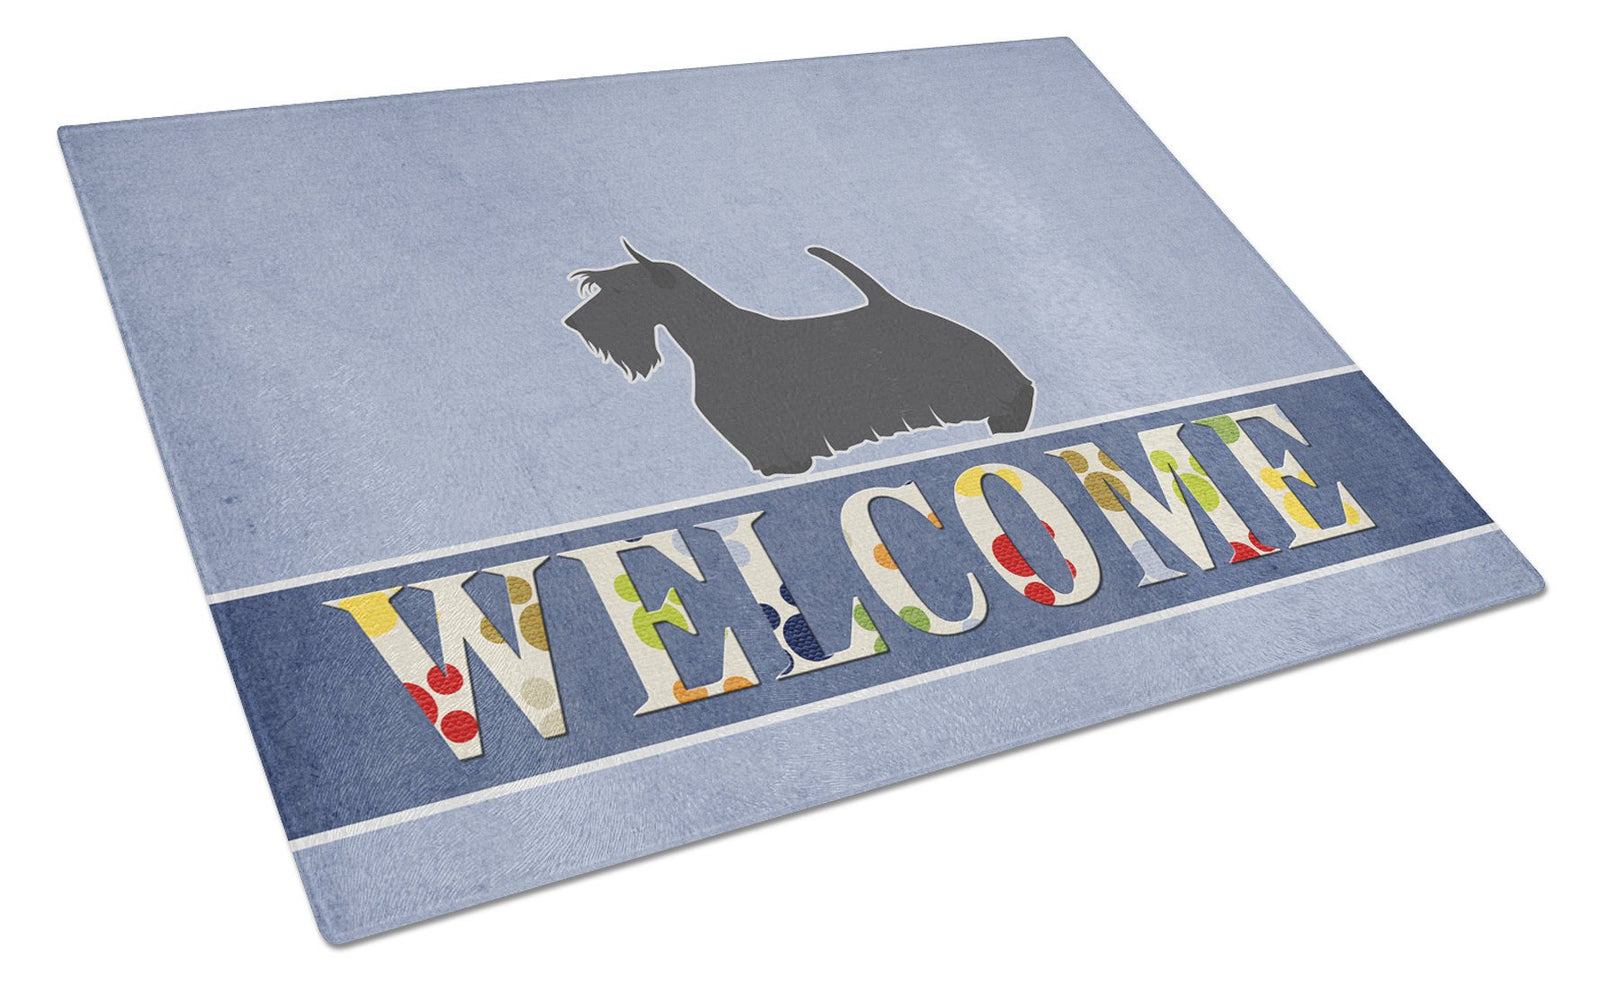 Scottish Terrier Welcome Glass Cutting Board Large BB5573LCB by Caroline's Treasures